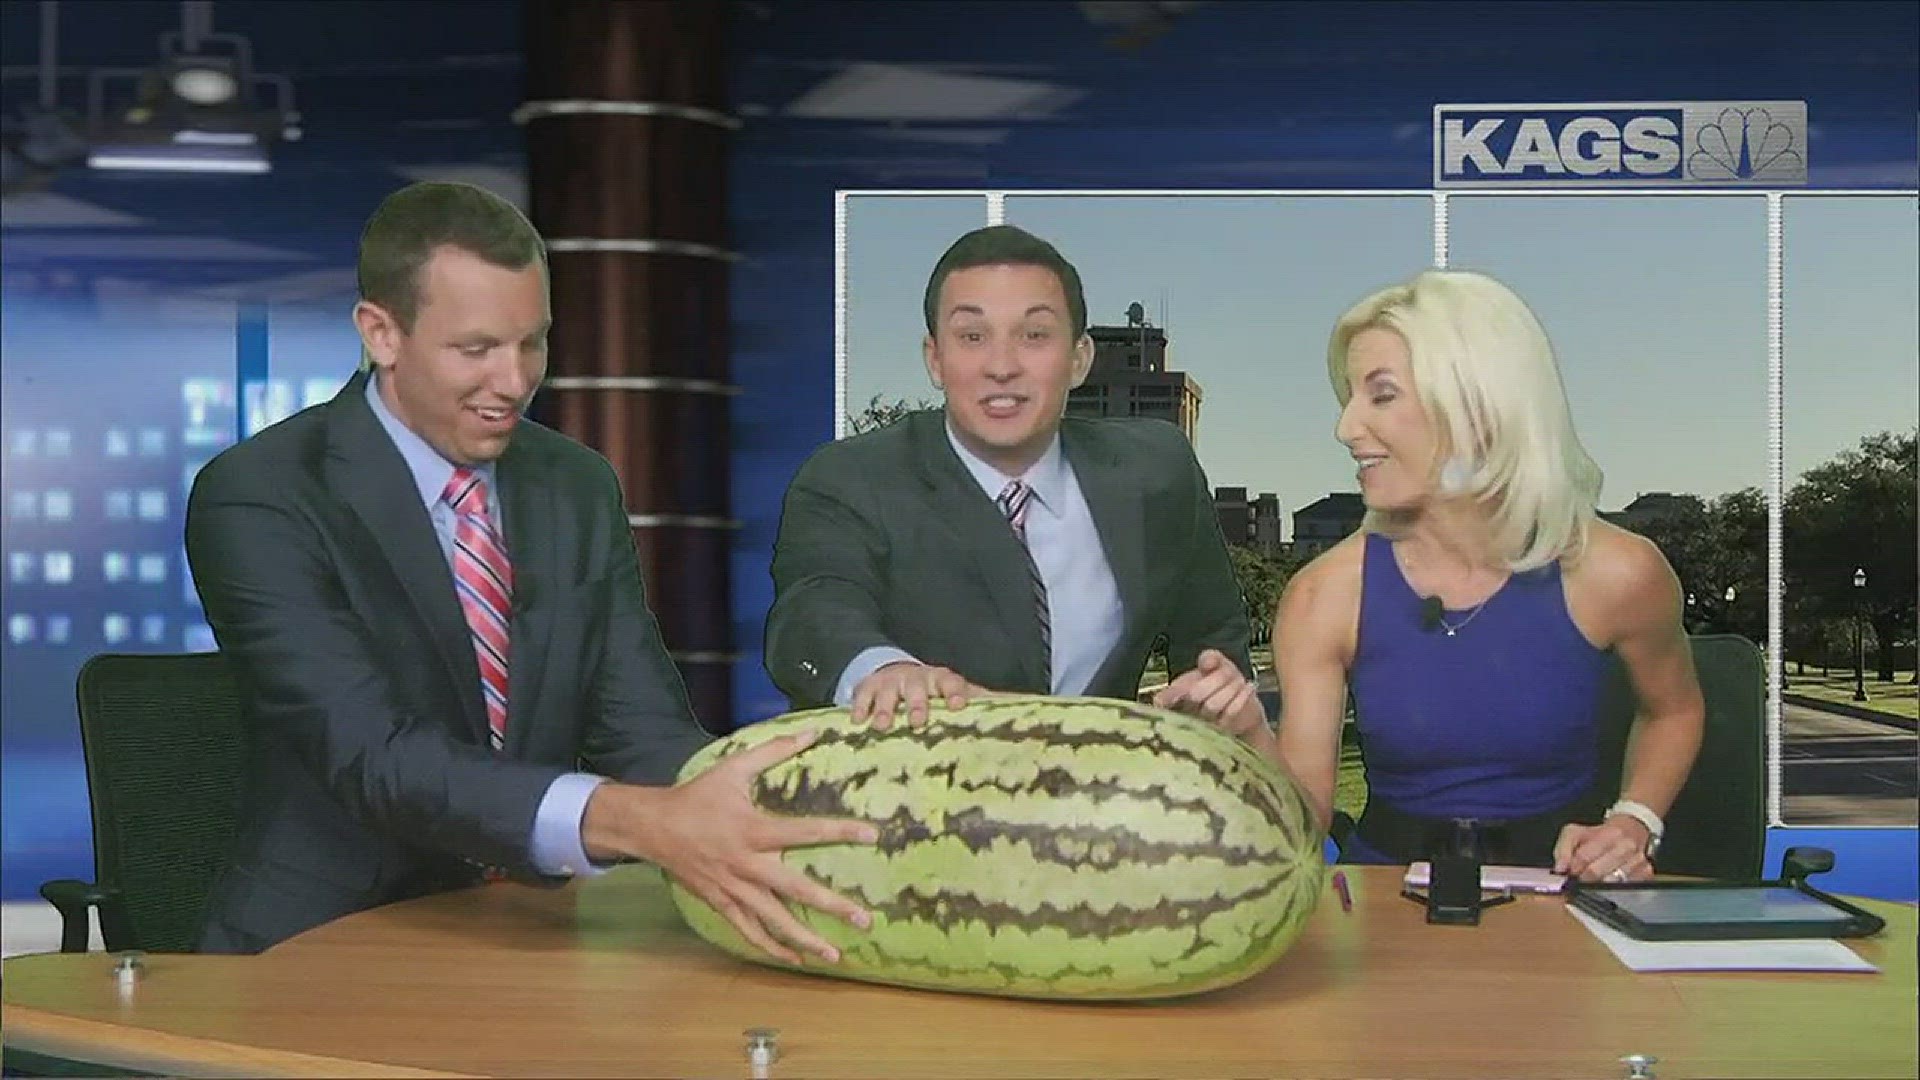 Gardner Donnie Hughes stopped by KAGS and shared a large watermelon from his garden with us.